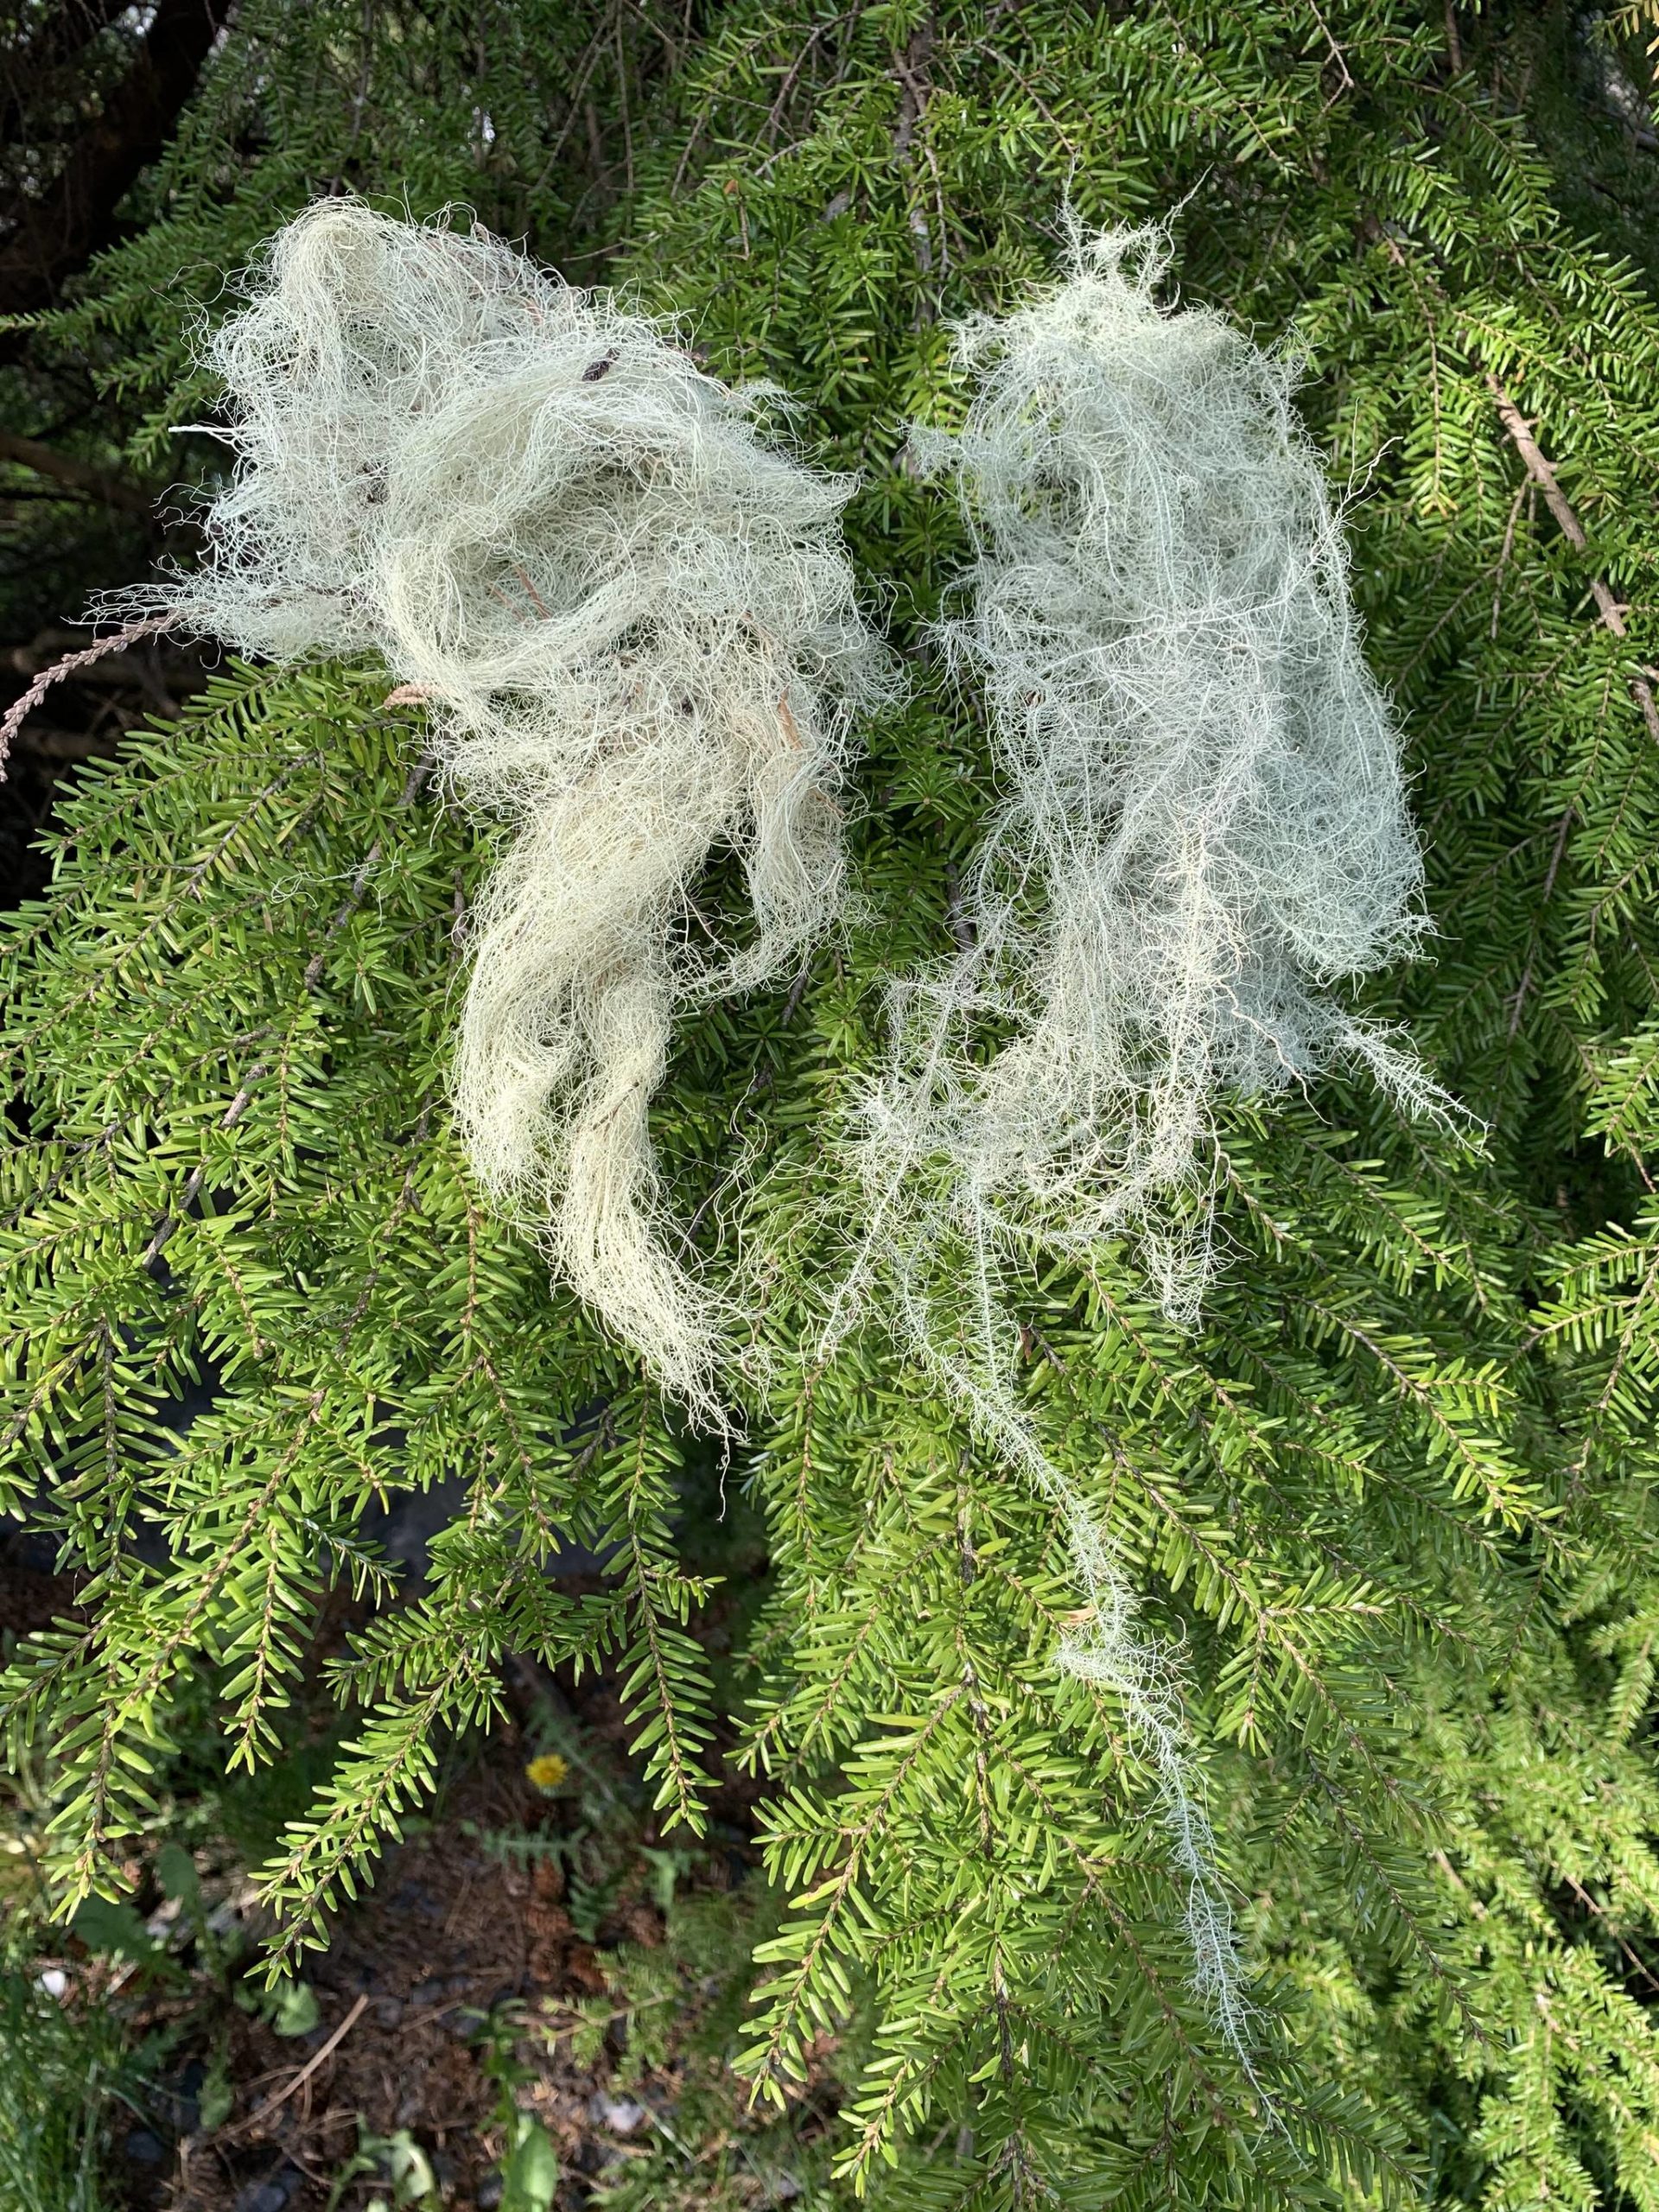 While they look similar, these are two types of hanging moss. On the left is Angel Hair, and on the right is Usnea, or Old Man’s Beard. (Vivian Faith Prescott | For the Capital City Weekly)